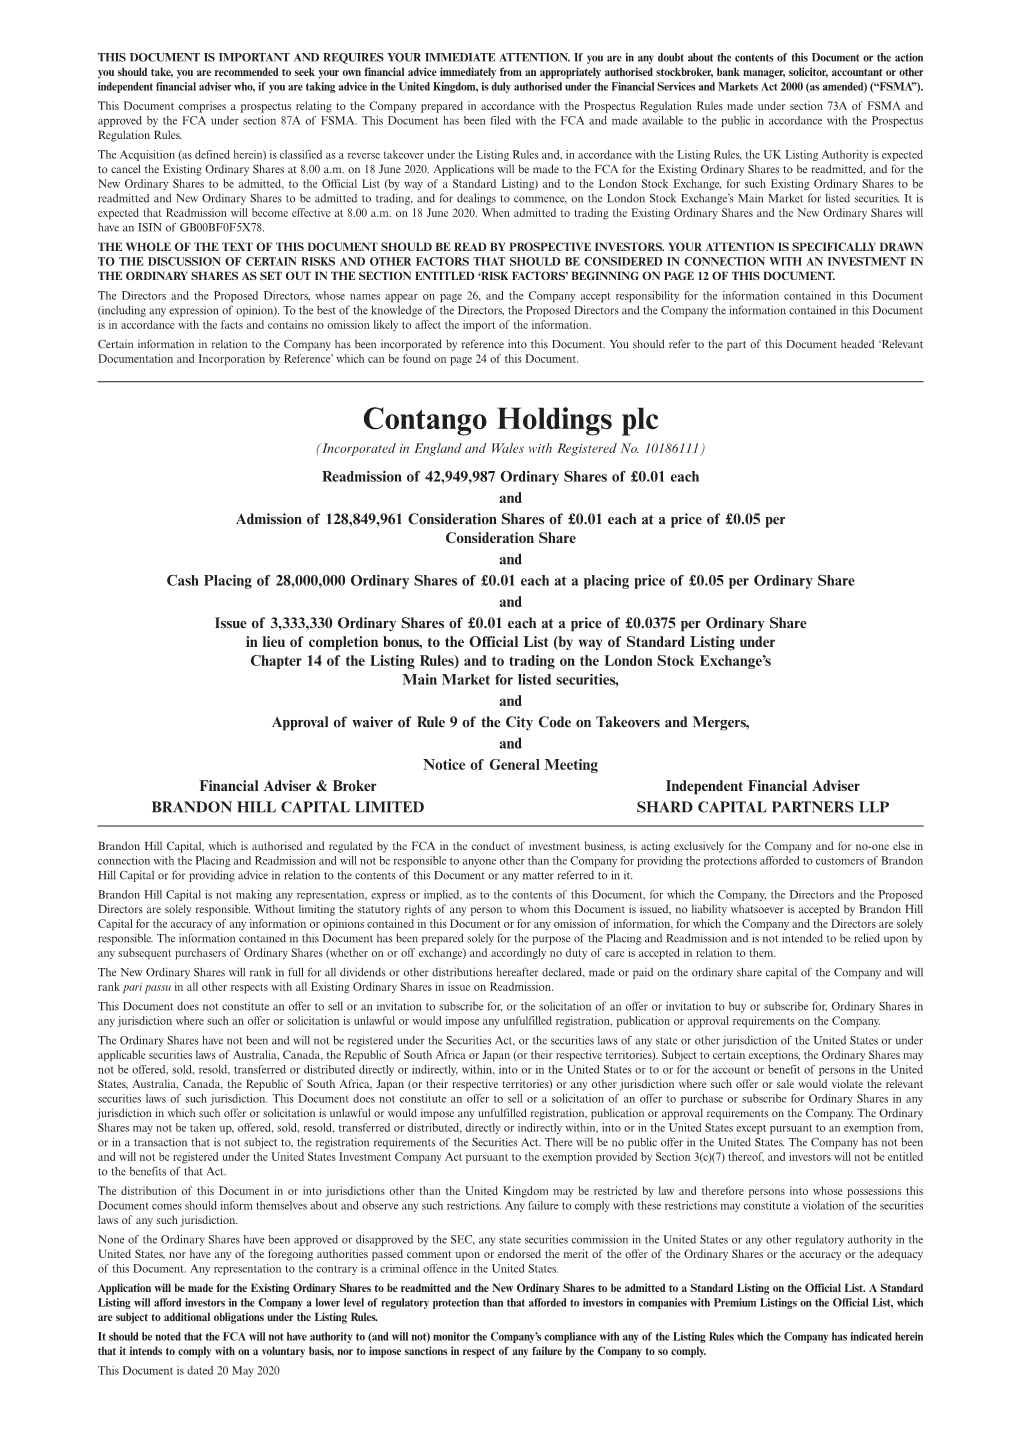 Contango Holdings Plc (11) 5.1.2 (Incorporated in England and Wales with Registered No